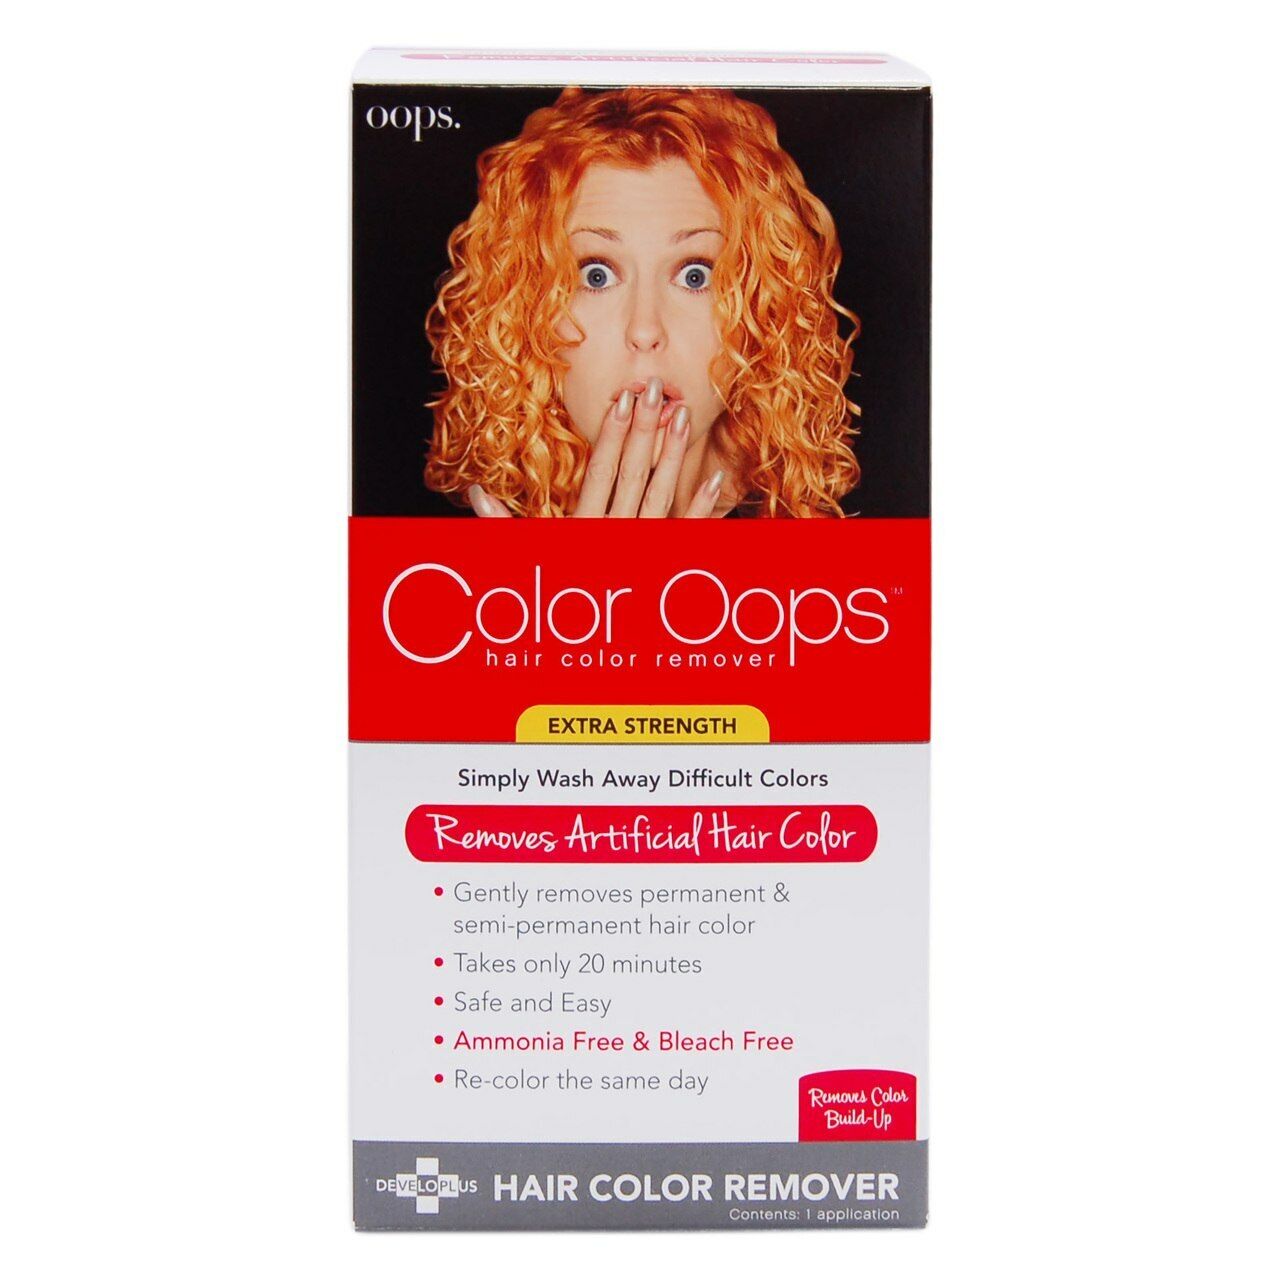 Color Oops Hair Color Remover, Extra Strength